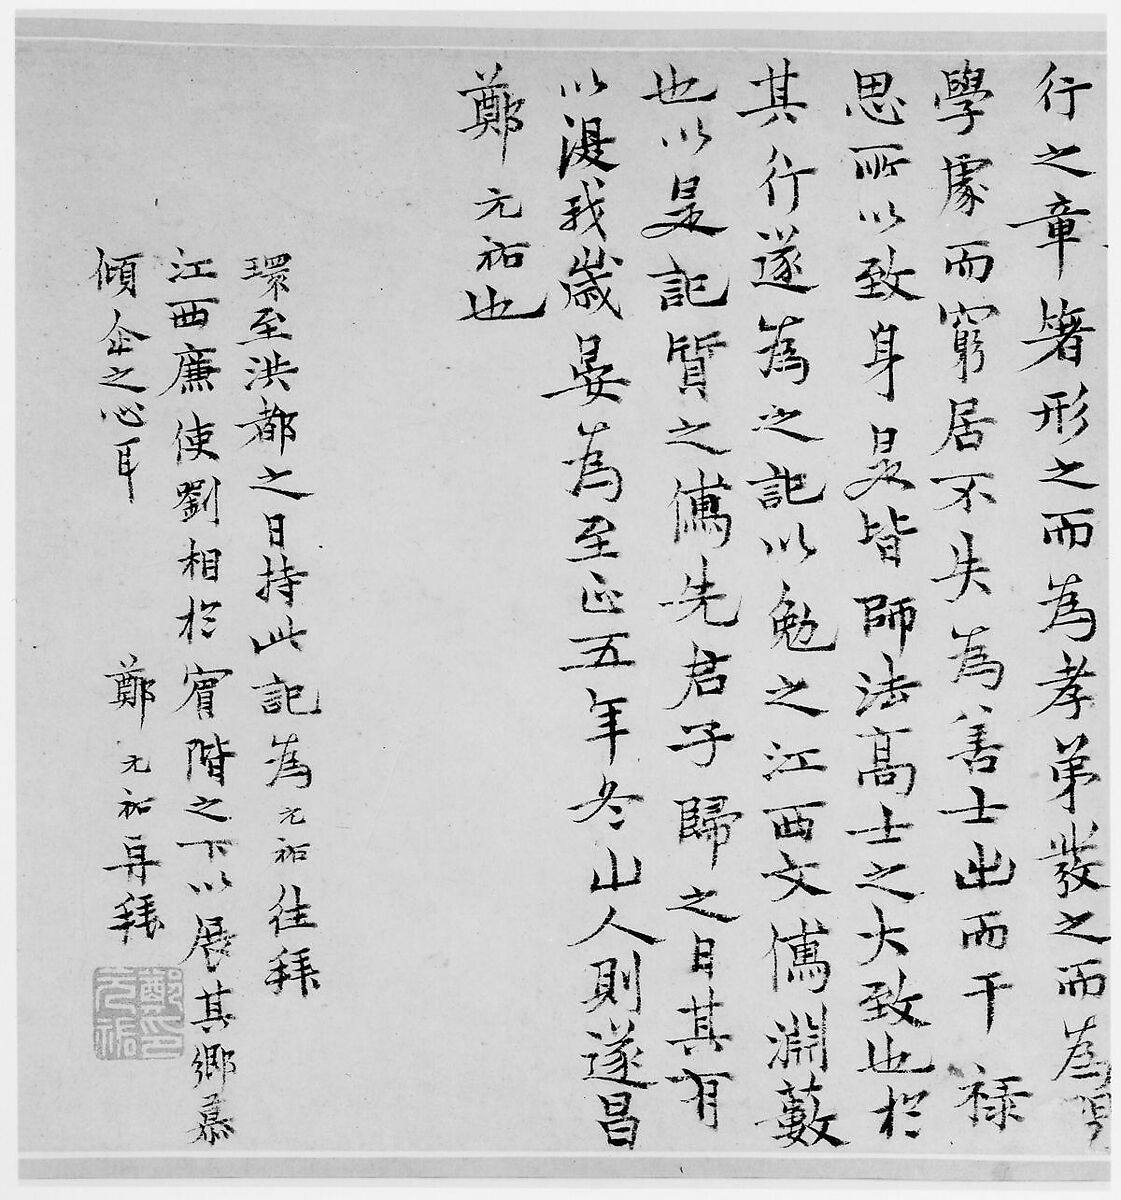 Record of the Following One's Ancestor Studio, Zheng Yuanyou (Chinese, 1292–1364), Handscroll; ink on paper, China 